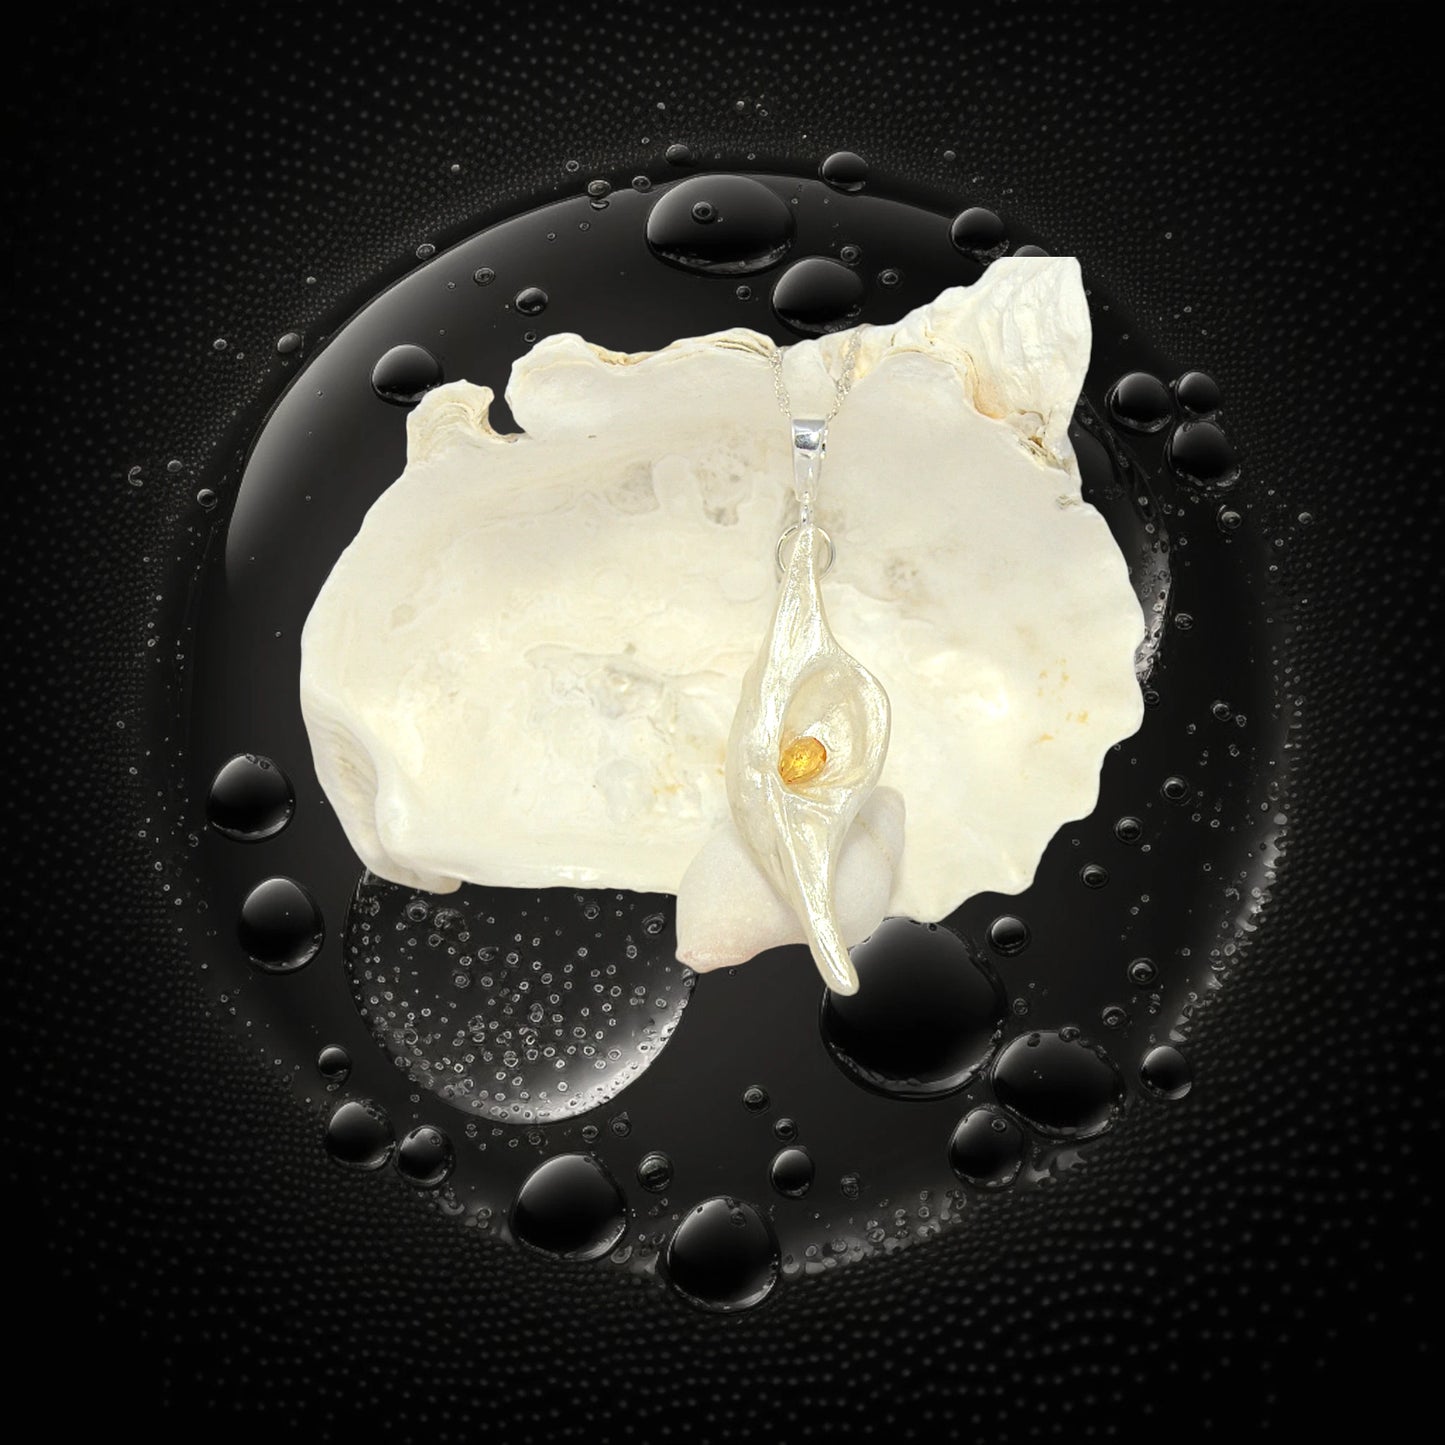 Lightmaker natural seashell pendant A beautiful pear shaped rose cut Citrine compliments the pendant. The pendant is displayed in front of a larger seashell.  the background is black water bubbles.